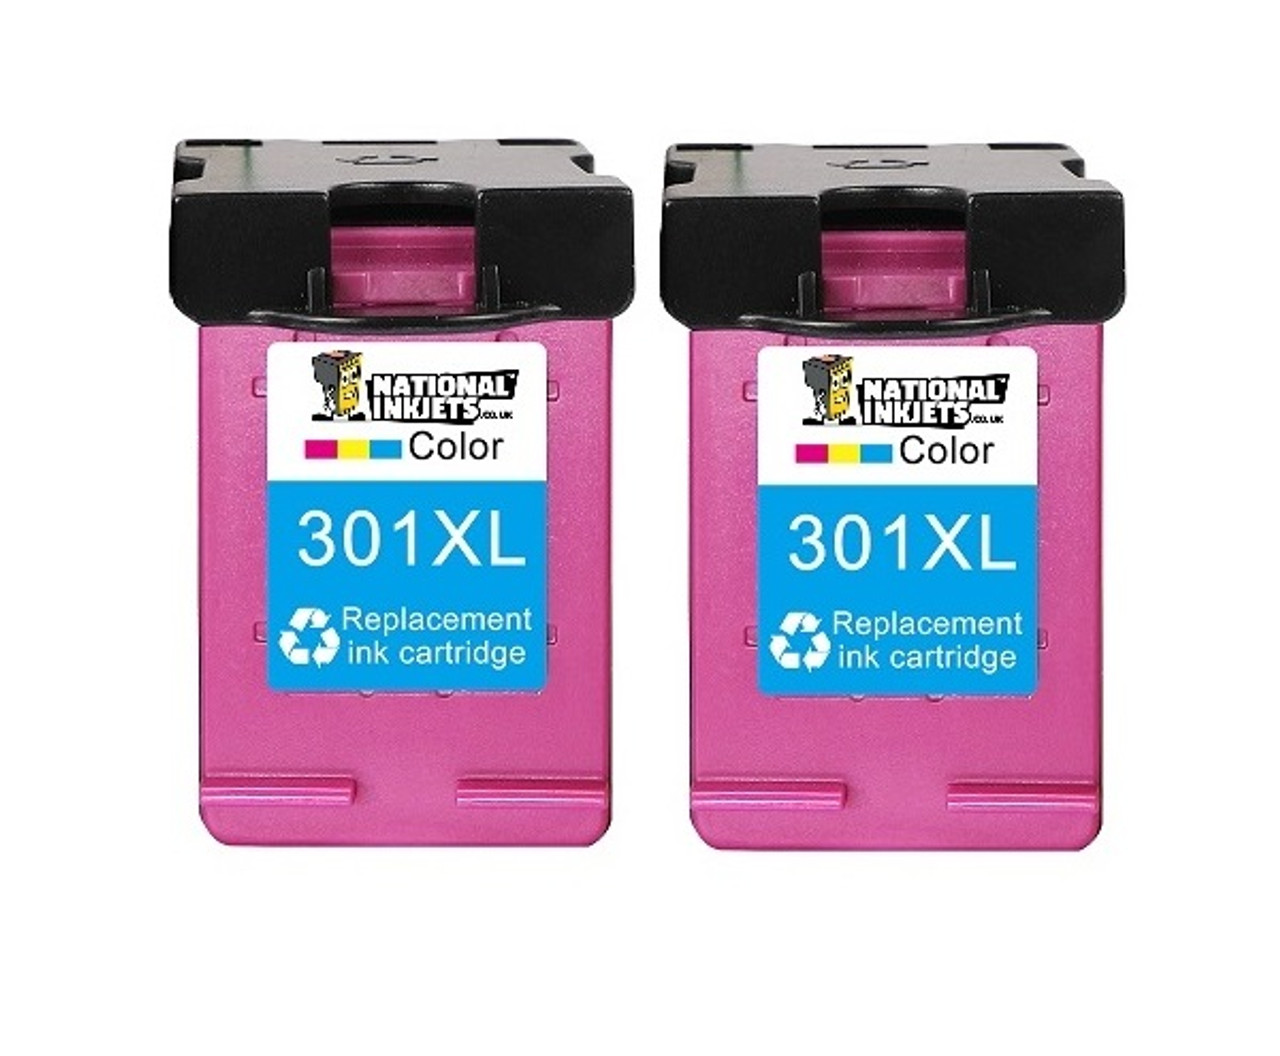 Ordenanza del gobierno Alrededores falso Compatible HP 301XL (CH564EE) Colour Ink Cartridge twin pack - National  Inkjets™